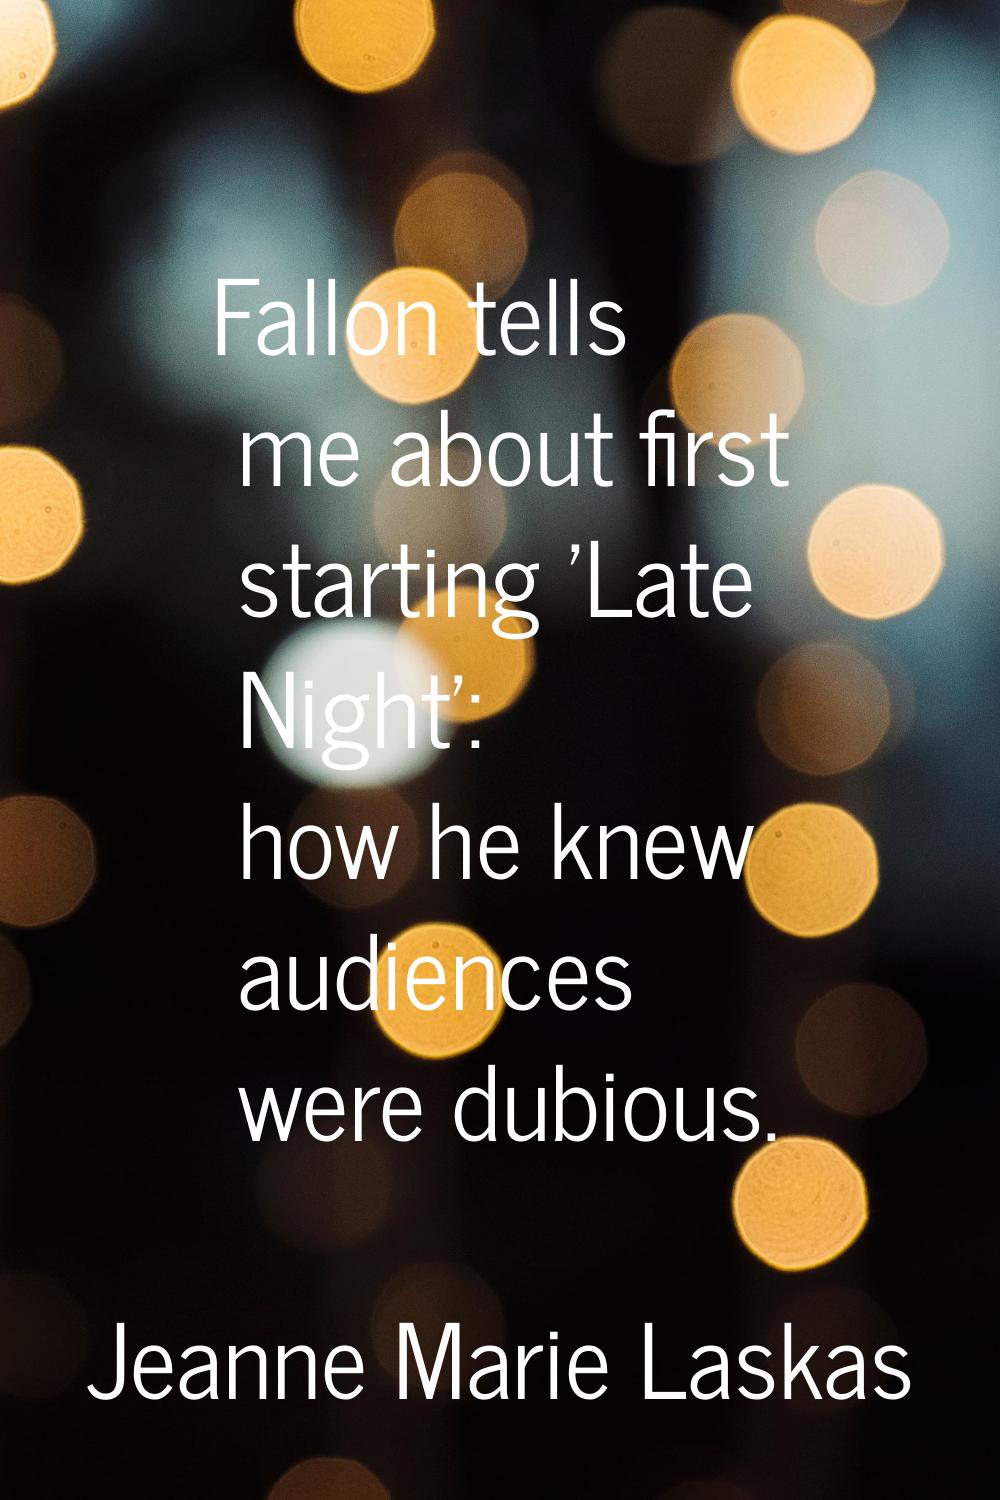 Fallon tells me about first starting 'Late Night': how he knew audiences were dubious.